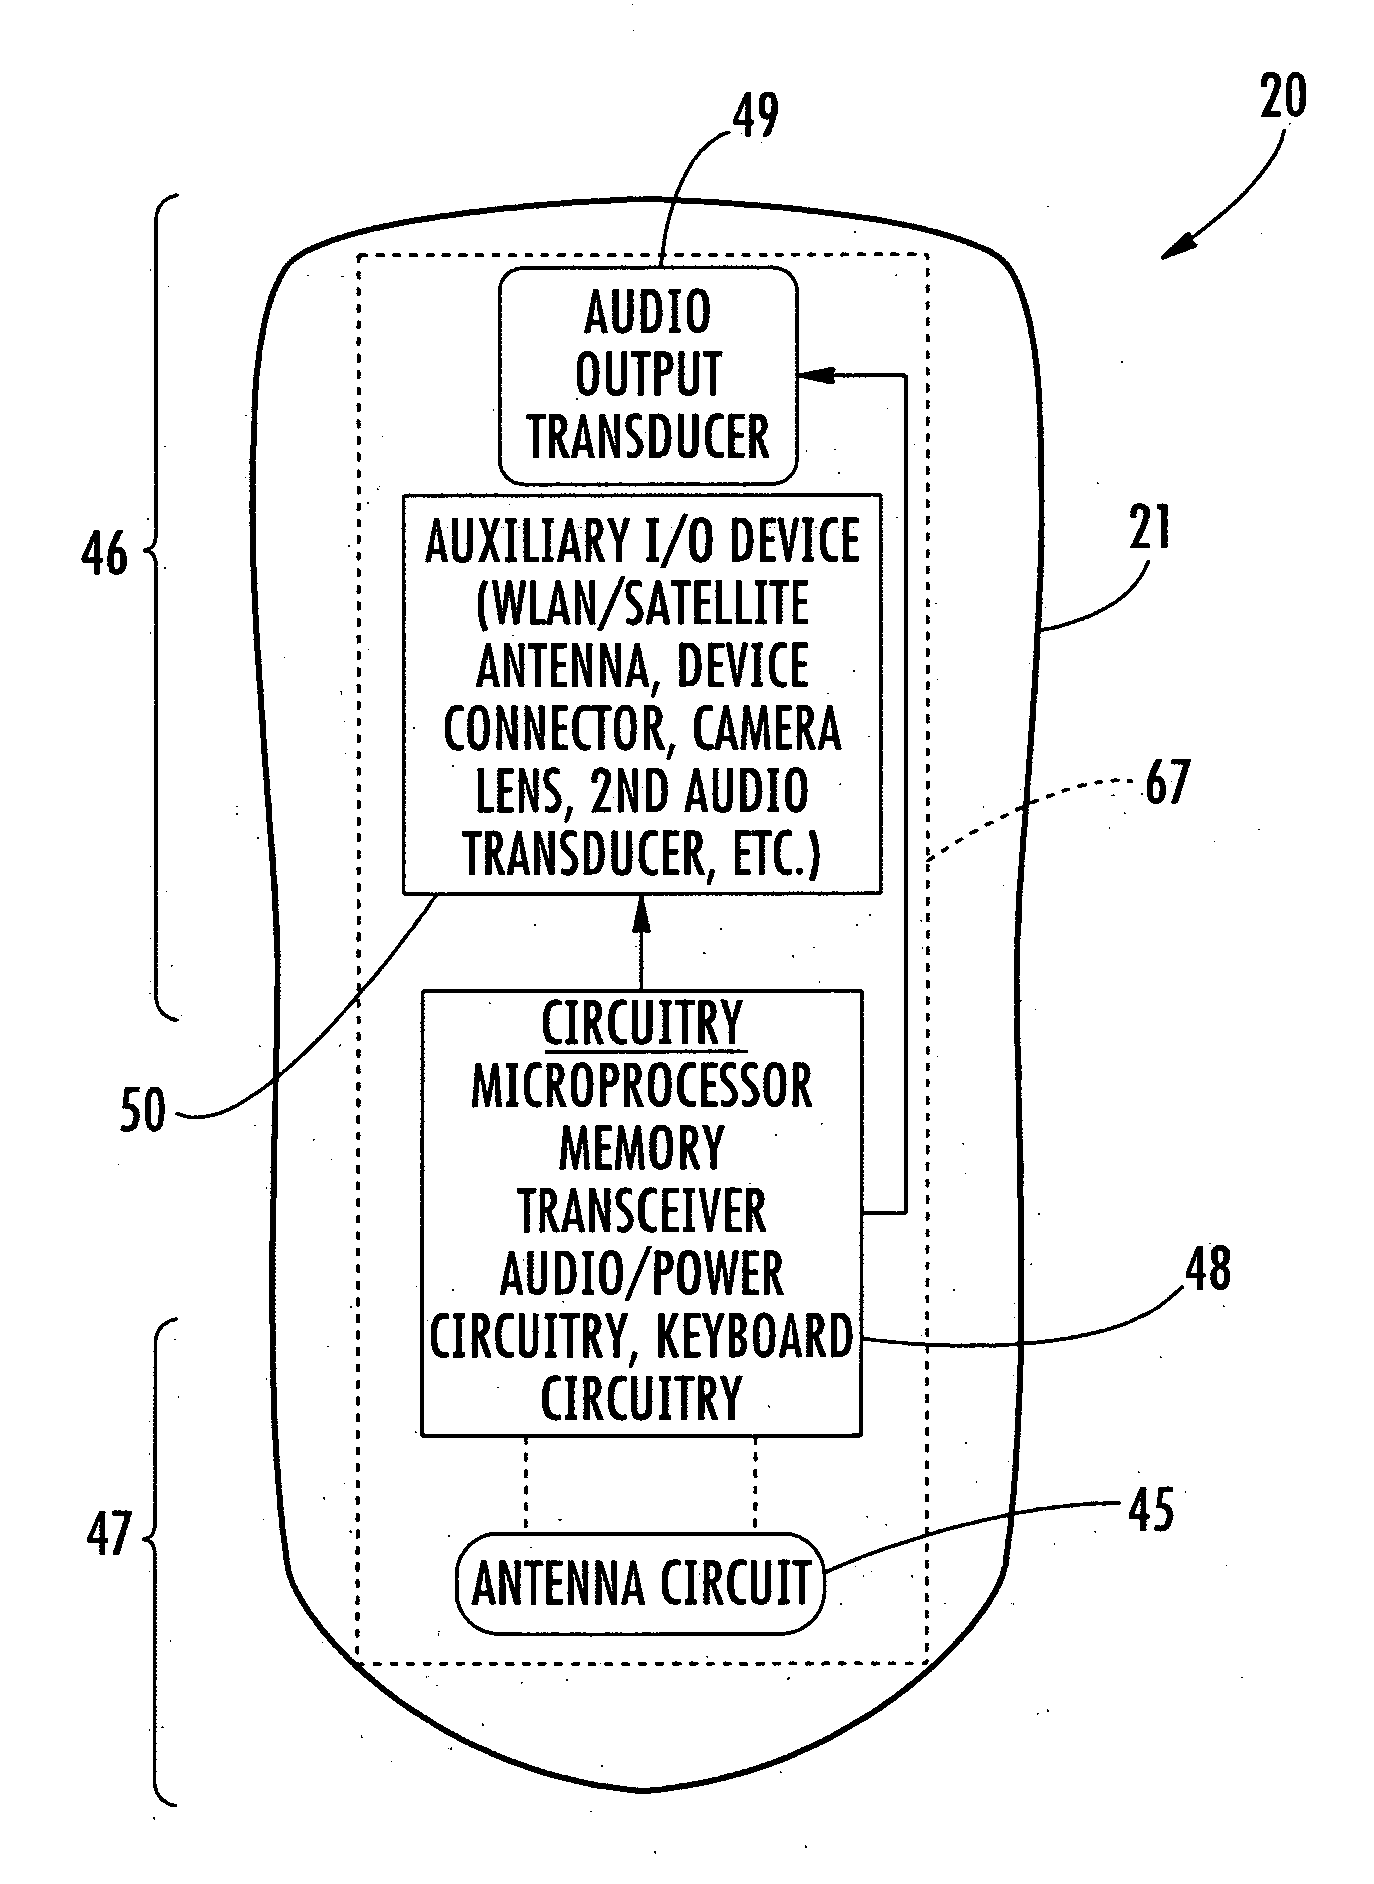 Mobile wireless communications device with reduced interfering energy into audio circuit and related methods